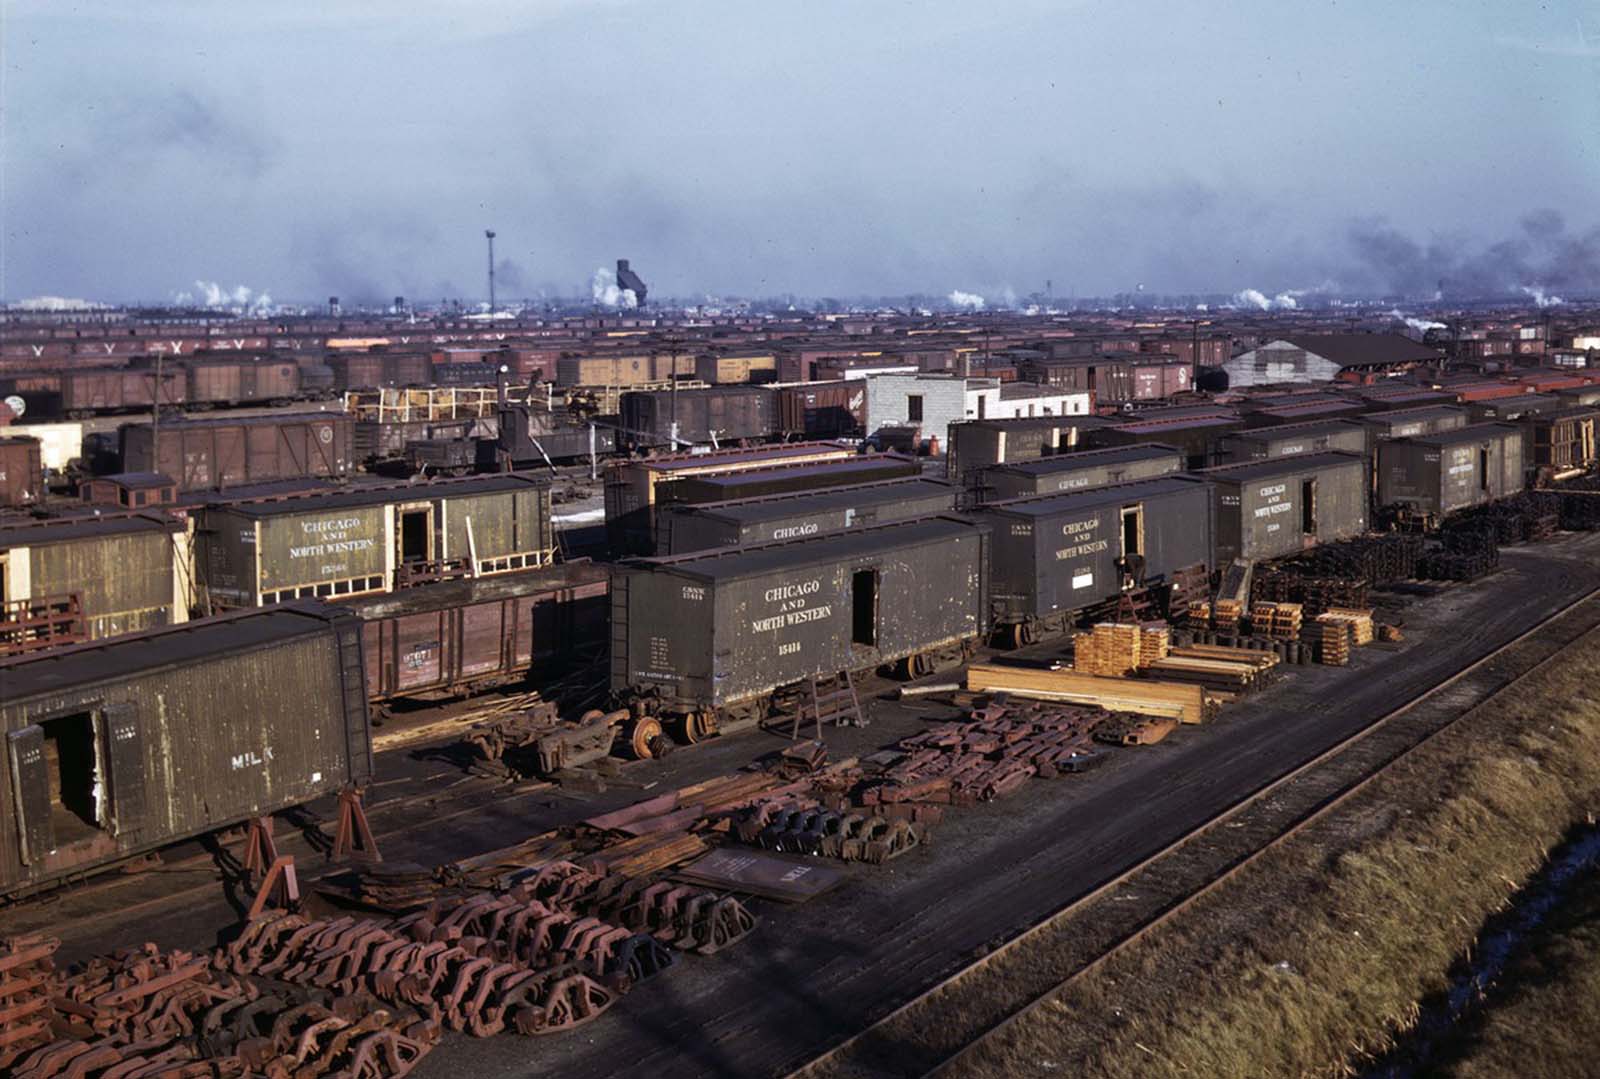 Freight cars are maneuvered in a Chicago and North Western Railroad yard in December 1942.